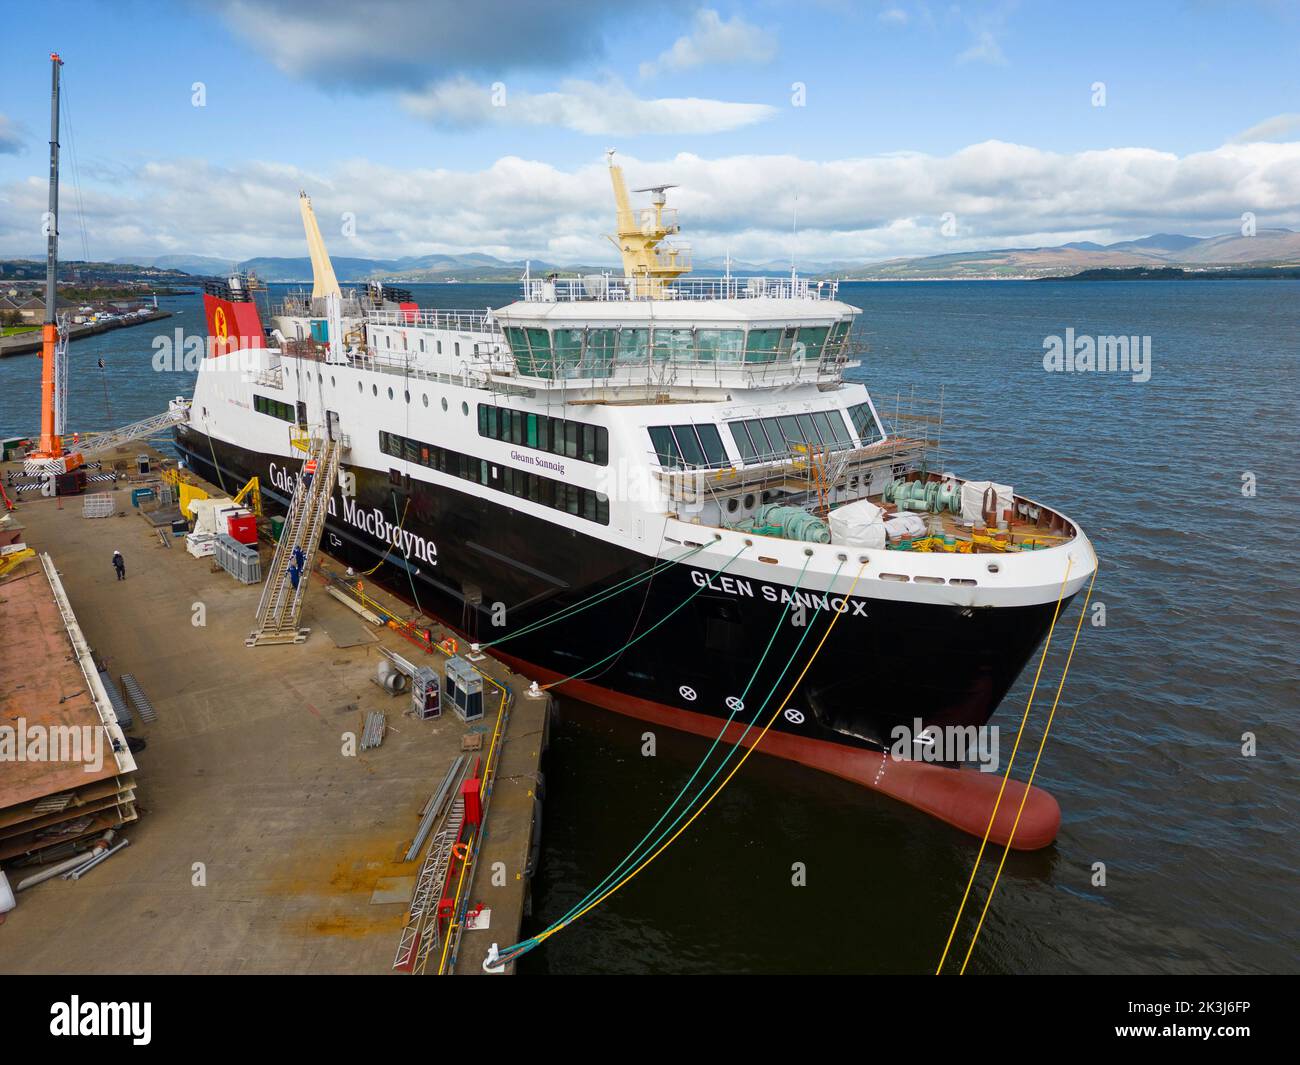 Port Glasgow, Scotland, UK. 27th September 2022. Aerial views of controversial passenger ferry MV Glen Sannox under construction at Ferguson Marine shipyard on the River Clyde. Further revelations about how the ferry, which is years late and over budget,  was procured are revealed today by a dossier compiled by the BBC. Iain Masterton/Alamy Live News Stock Photo